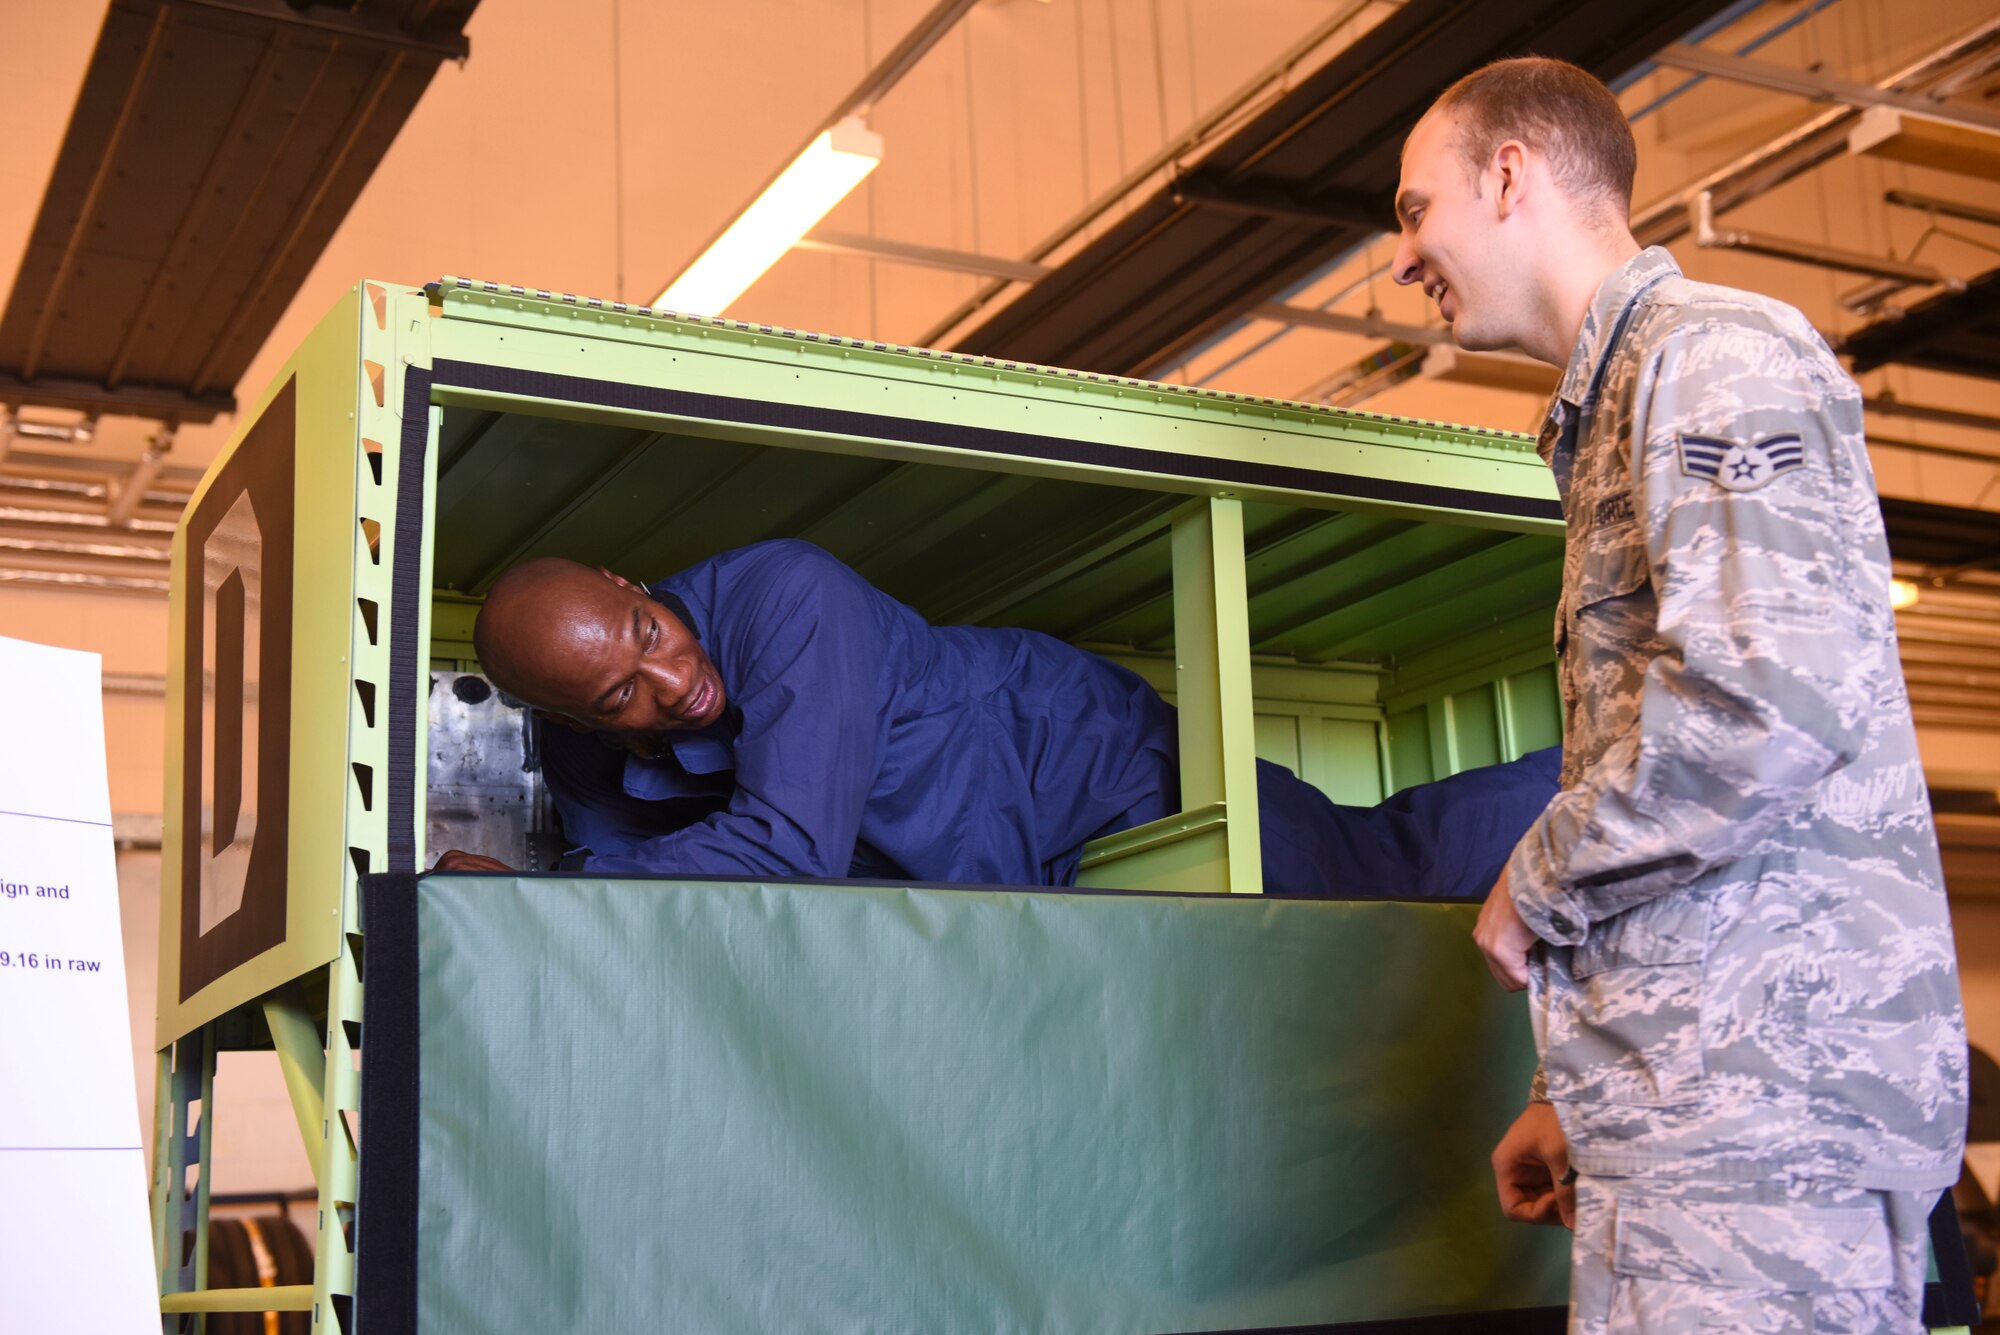 Chief Master Sgt. of the Air Force Kaleth O. Wright climbs into a fuel cell maintenance trainer during his visit to RAF Mildenhall, England, Aug. 2, 2018. Wright also took part in a 100th Security Forces Squadron shoot-house demonstration, participated in a Forward Area Refueling Point exercise, and spoke to RAF Mildenhall Airmen at an all-call during his visit to RAF Mildenhall. (U.S. Air Force photo by Senior Airman Luke Milano)